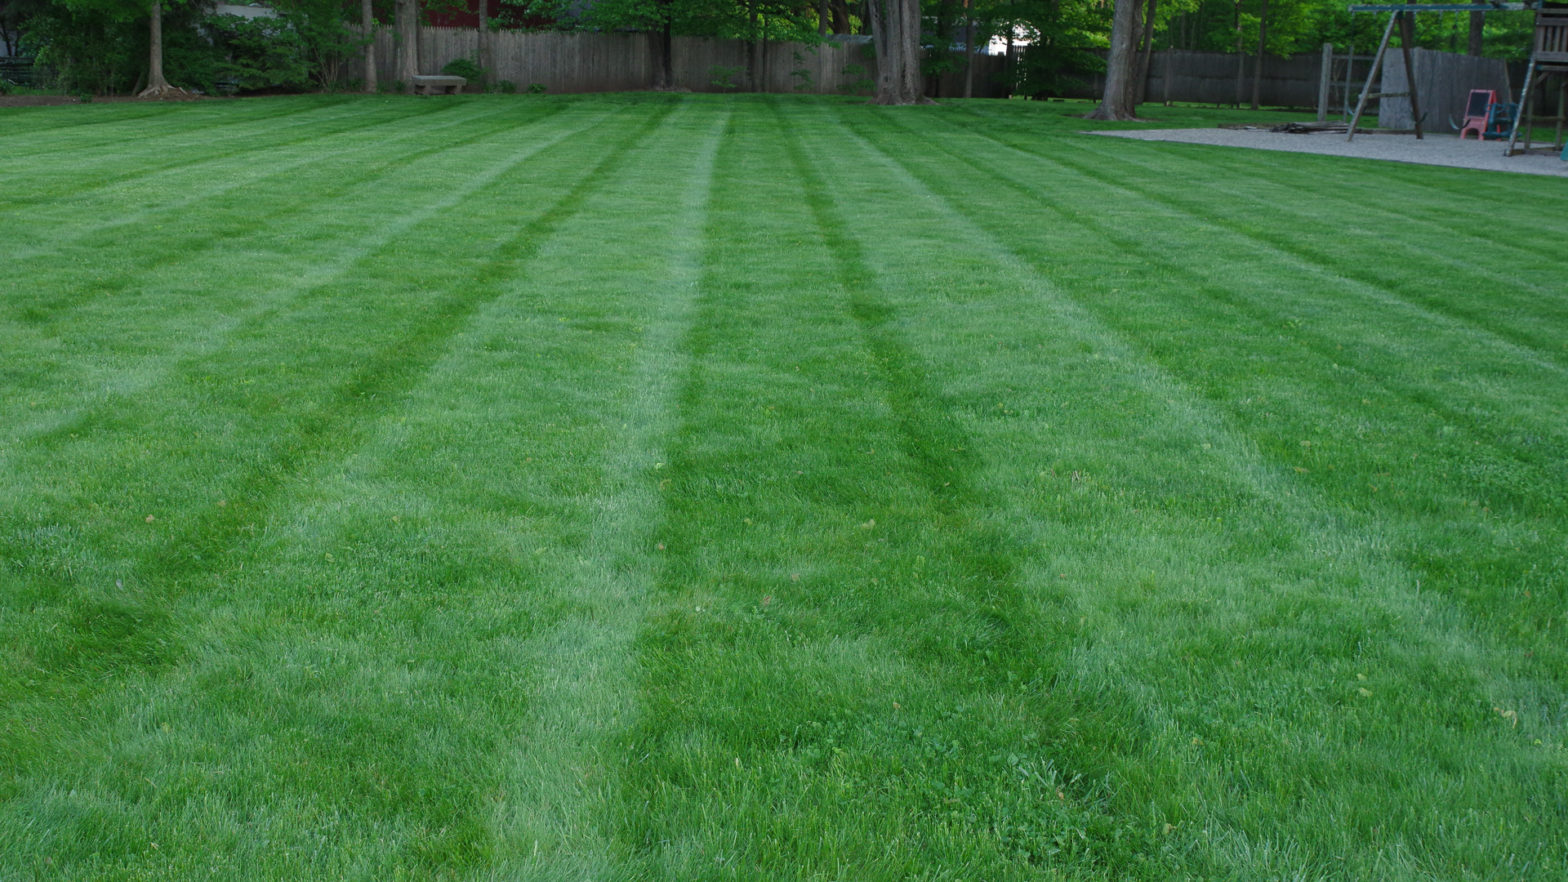 Lawn Striping and Lawn Mowing Tips